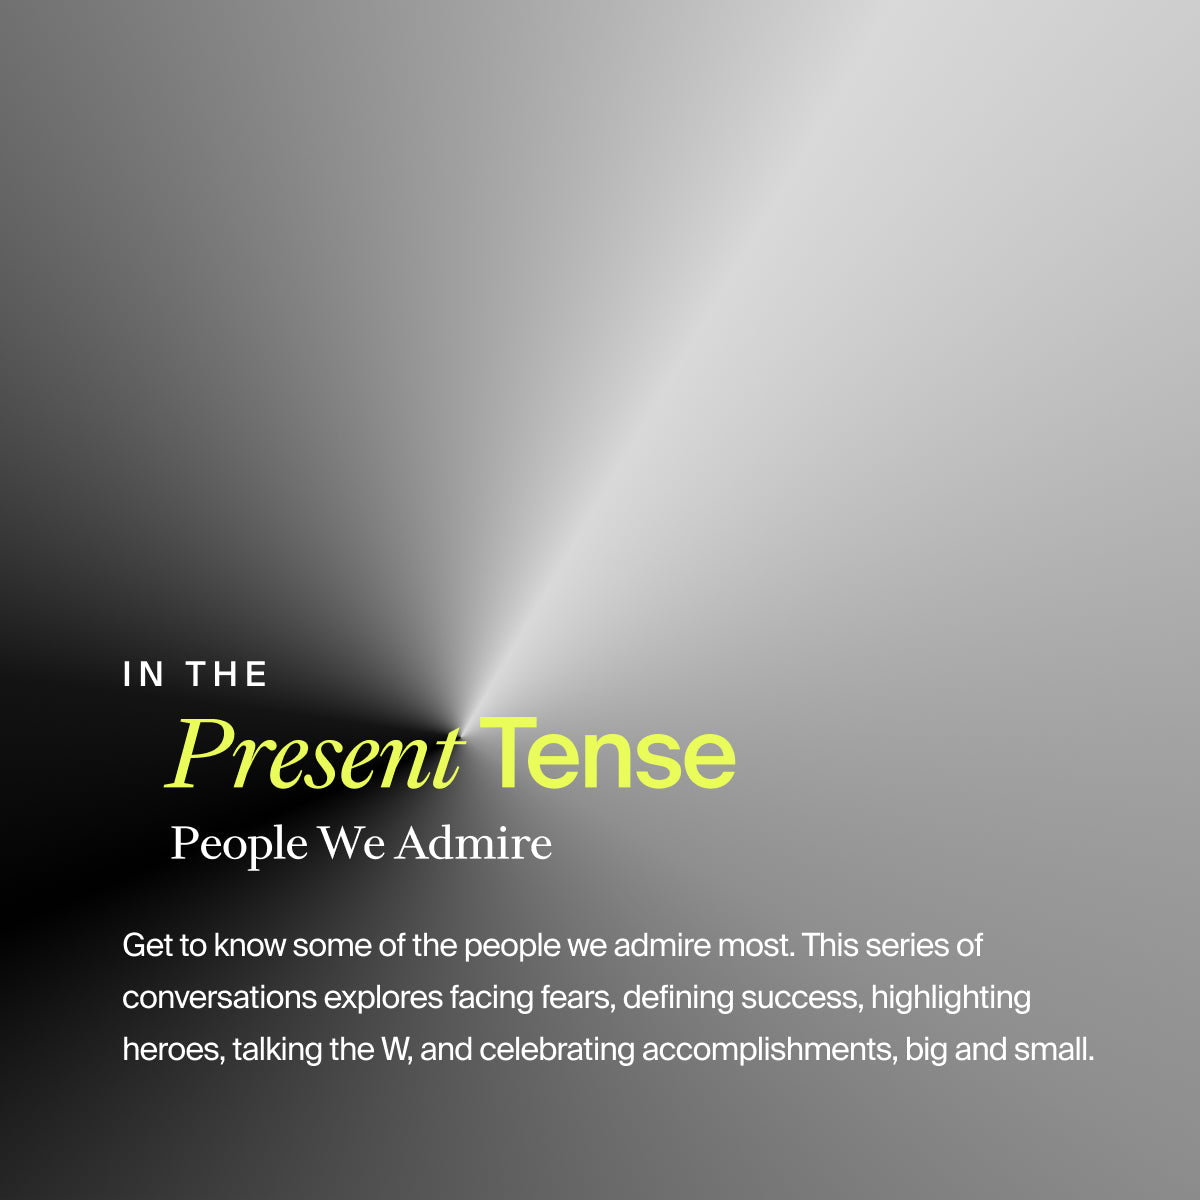 In the Present Tense: People We Admire. Get to know some of the people we admire most. This series of conversations explores facing fears, defining success, highlighting heroes, talking the W, and celebrating accomplishments, big and small.